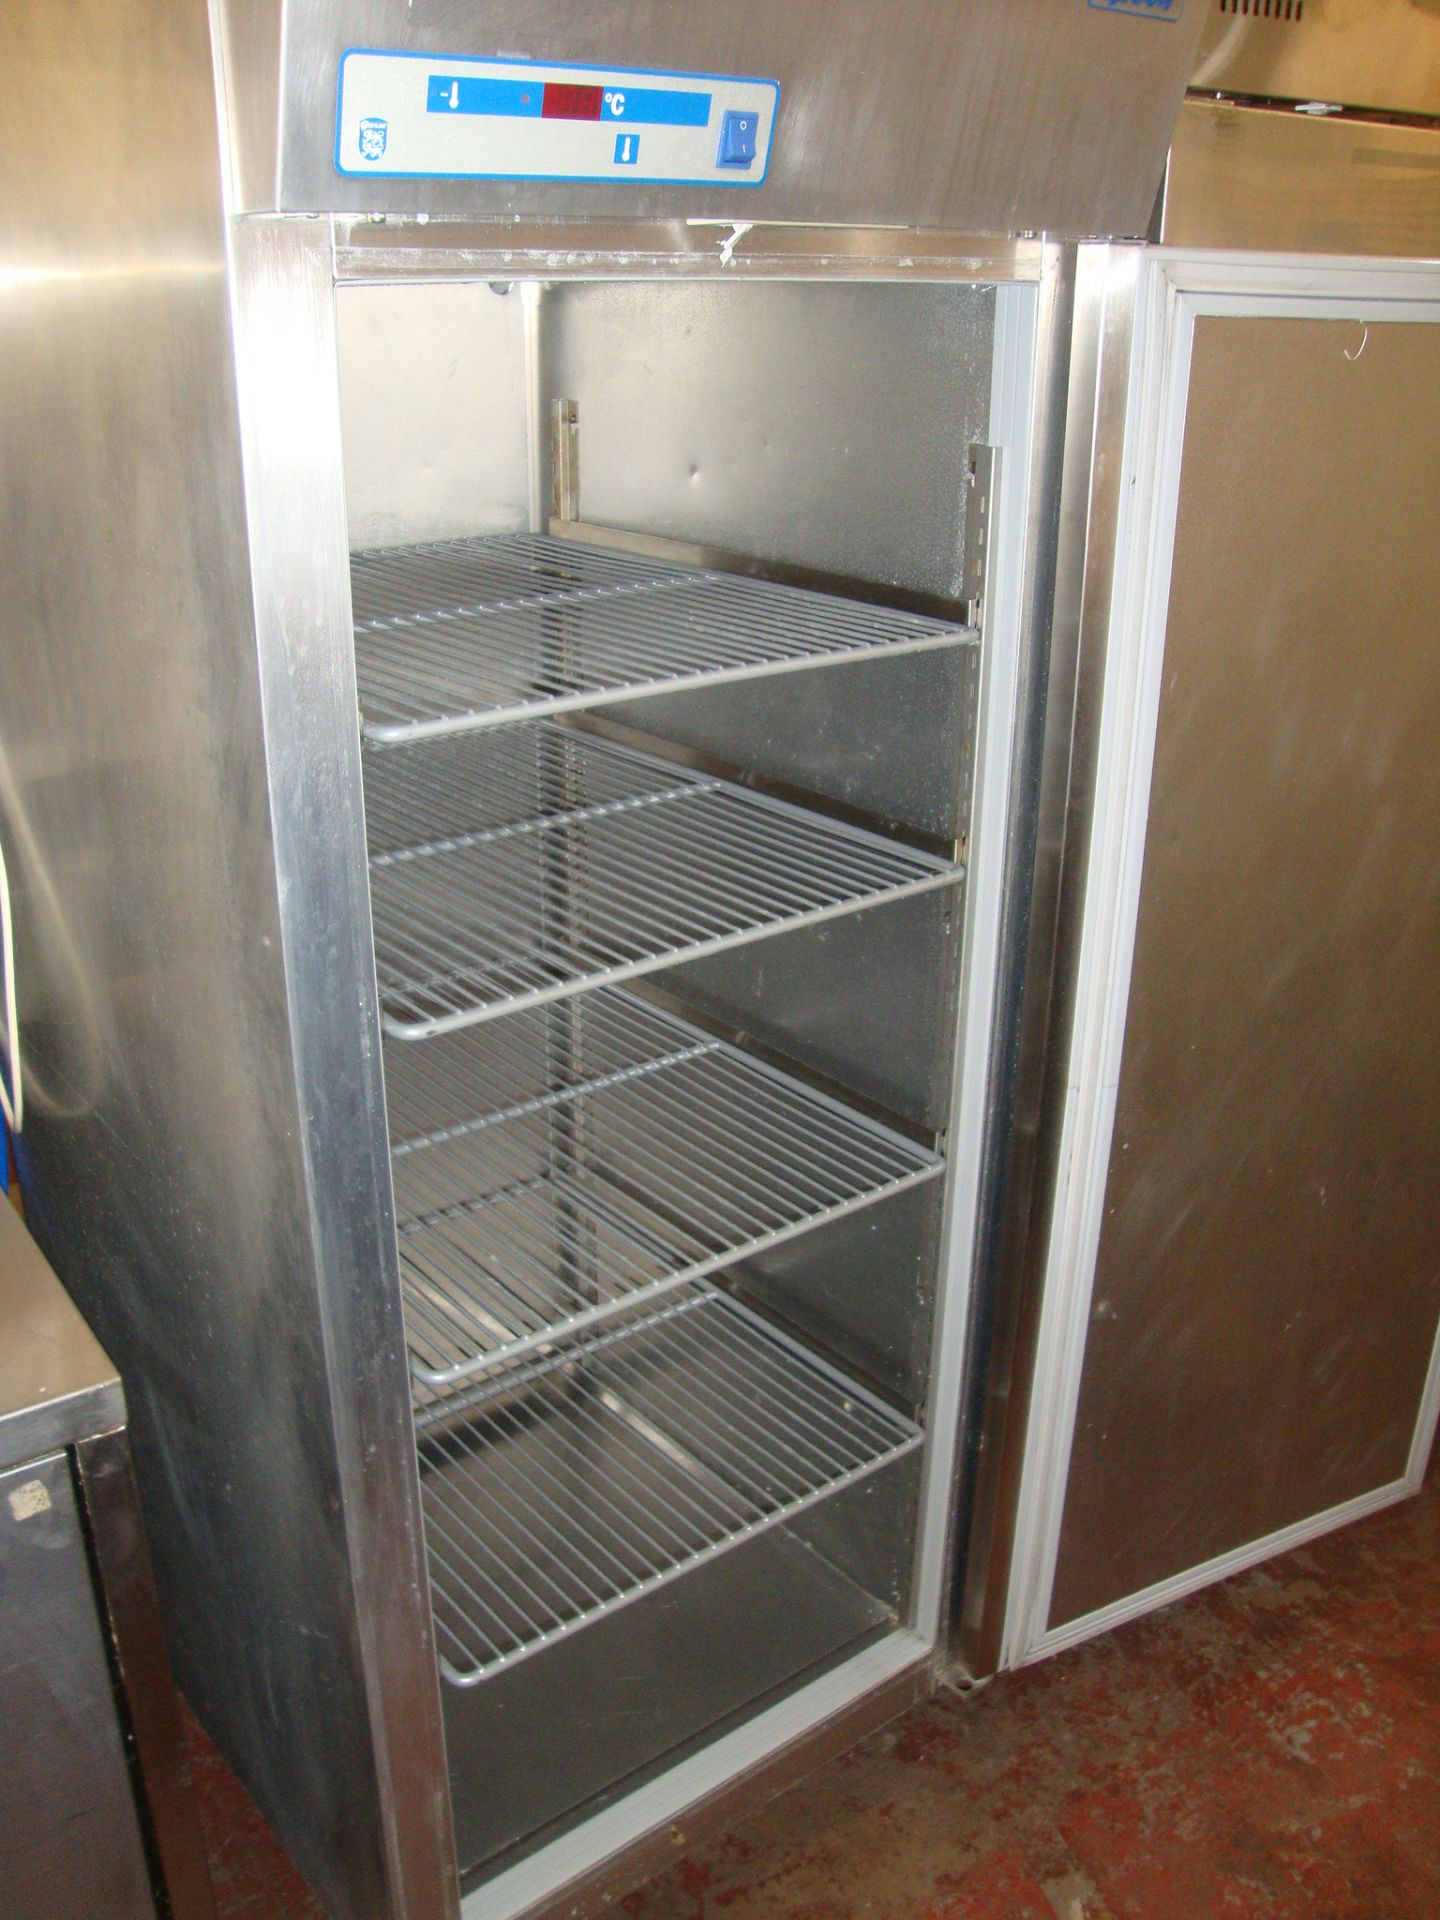 Gram F600 OPRHSE stainless steel mobile tall freezer - Image 2 of 4